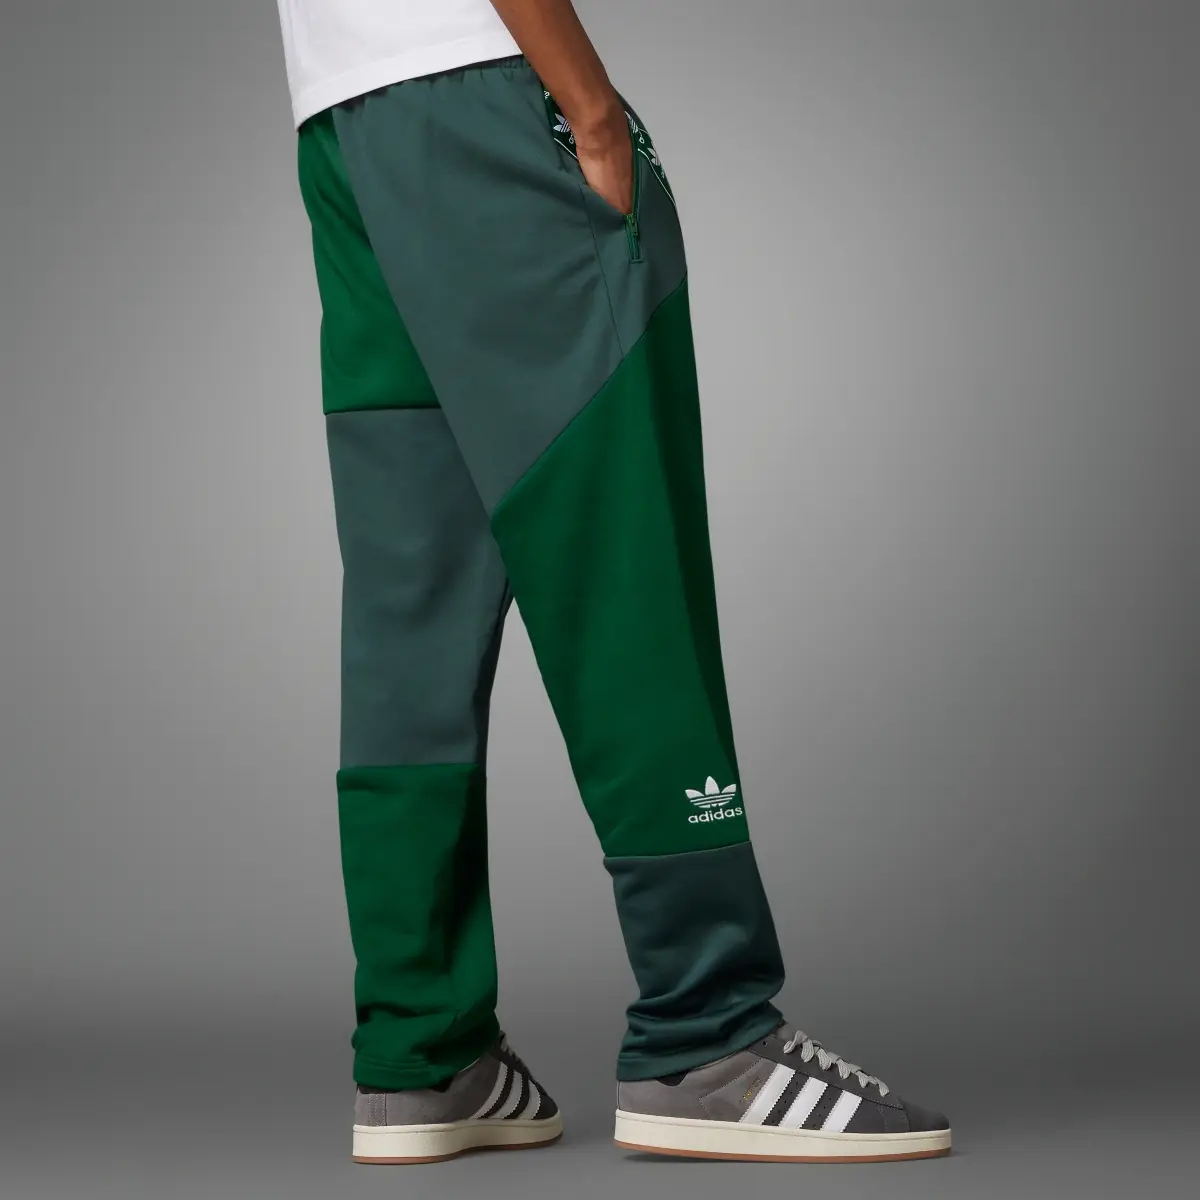 Adidas ADC Patchwork FB Track Pants. 2